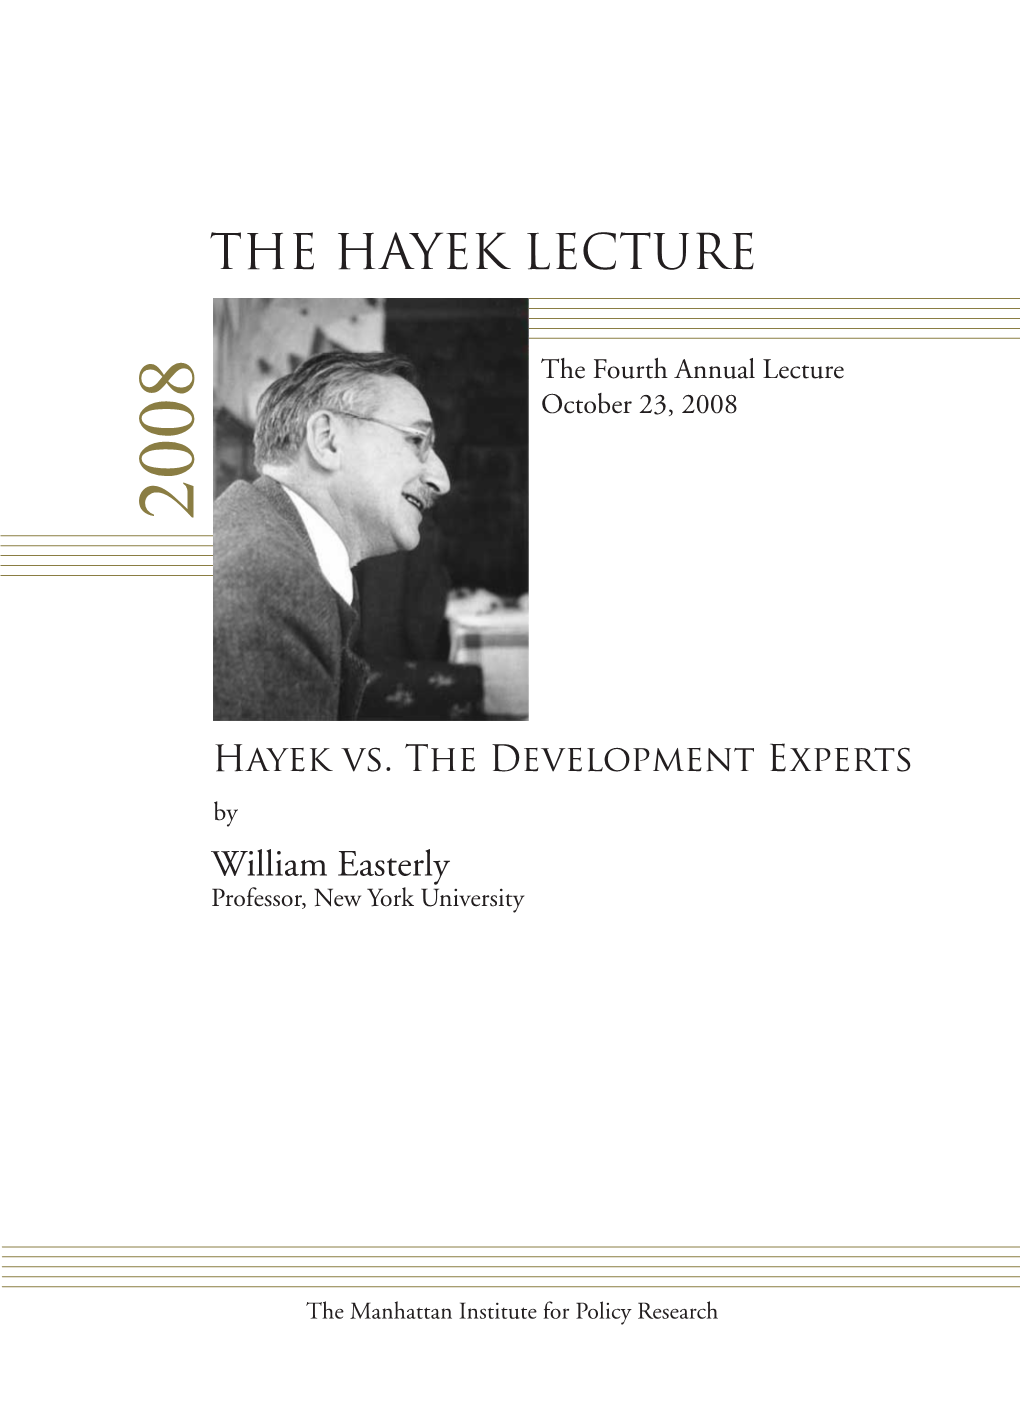 The Hayek Lecture